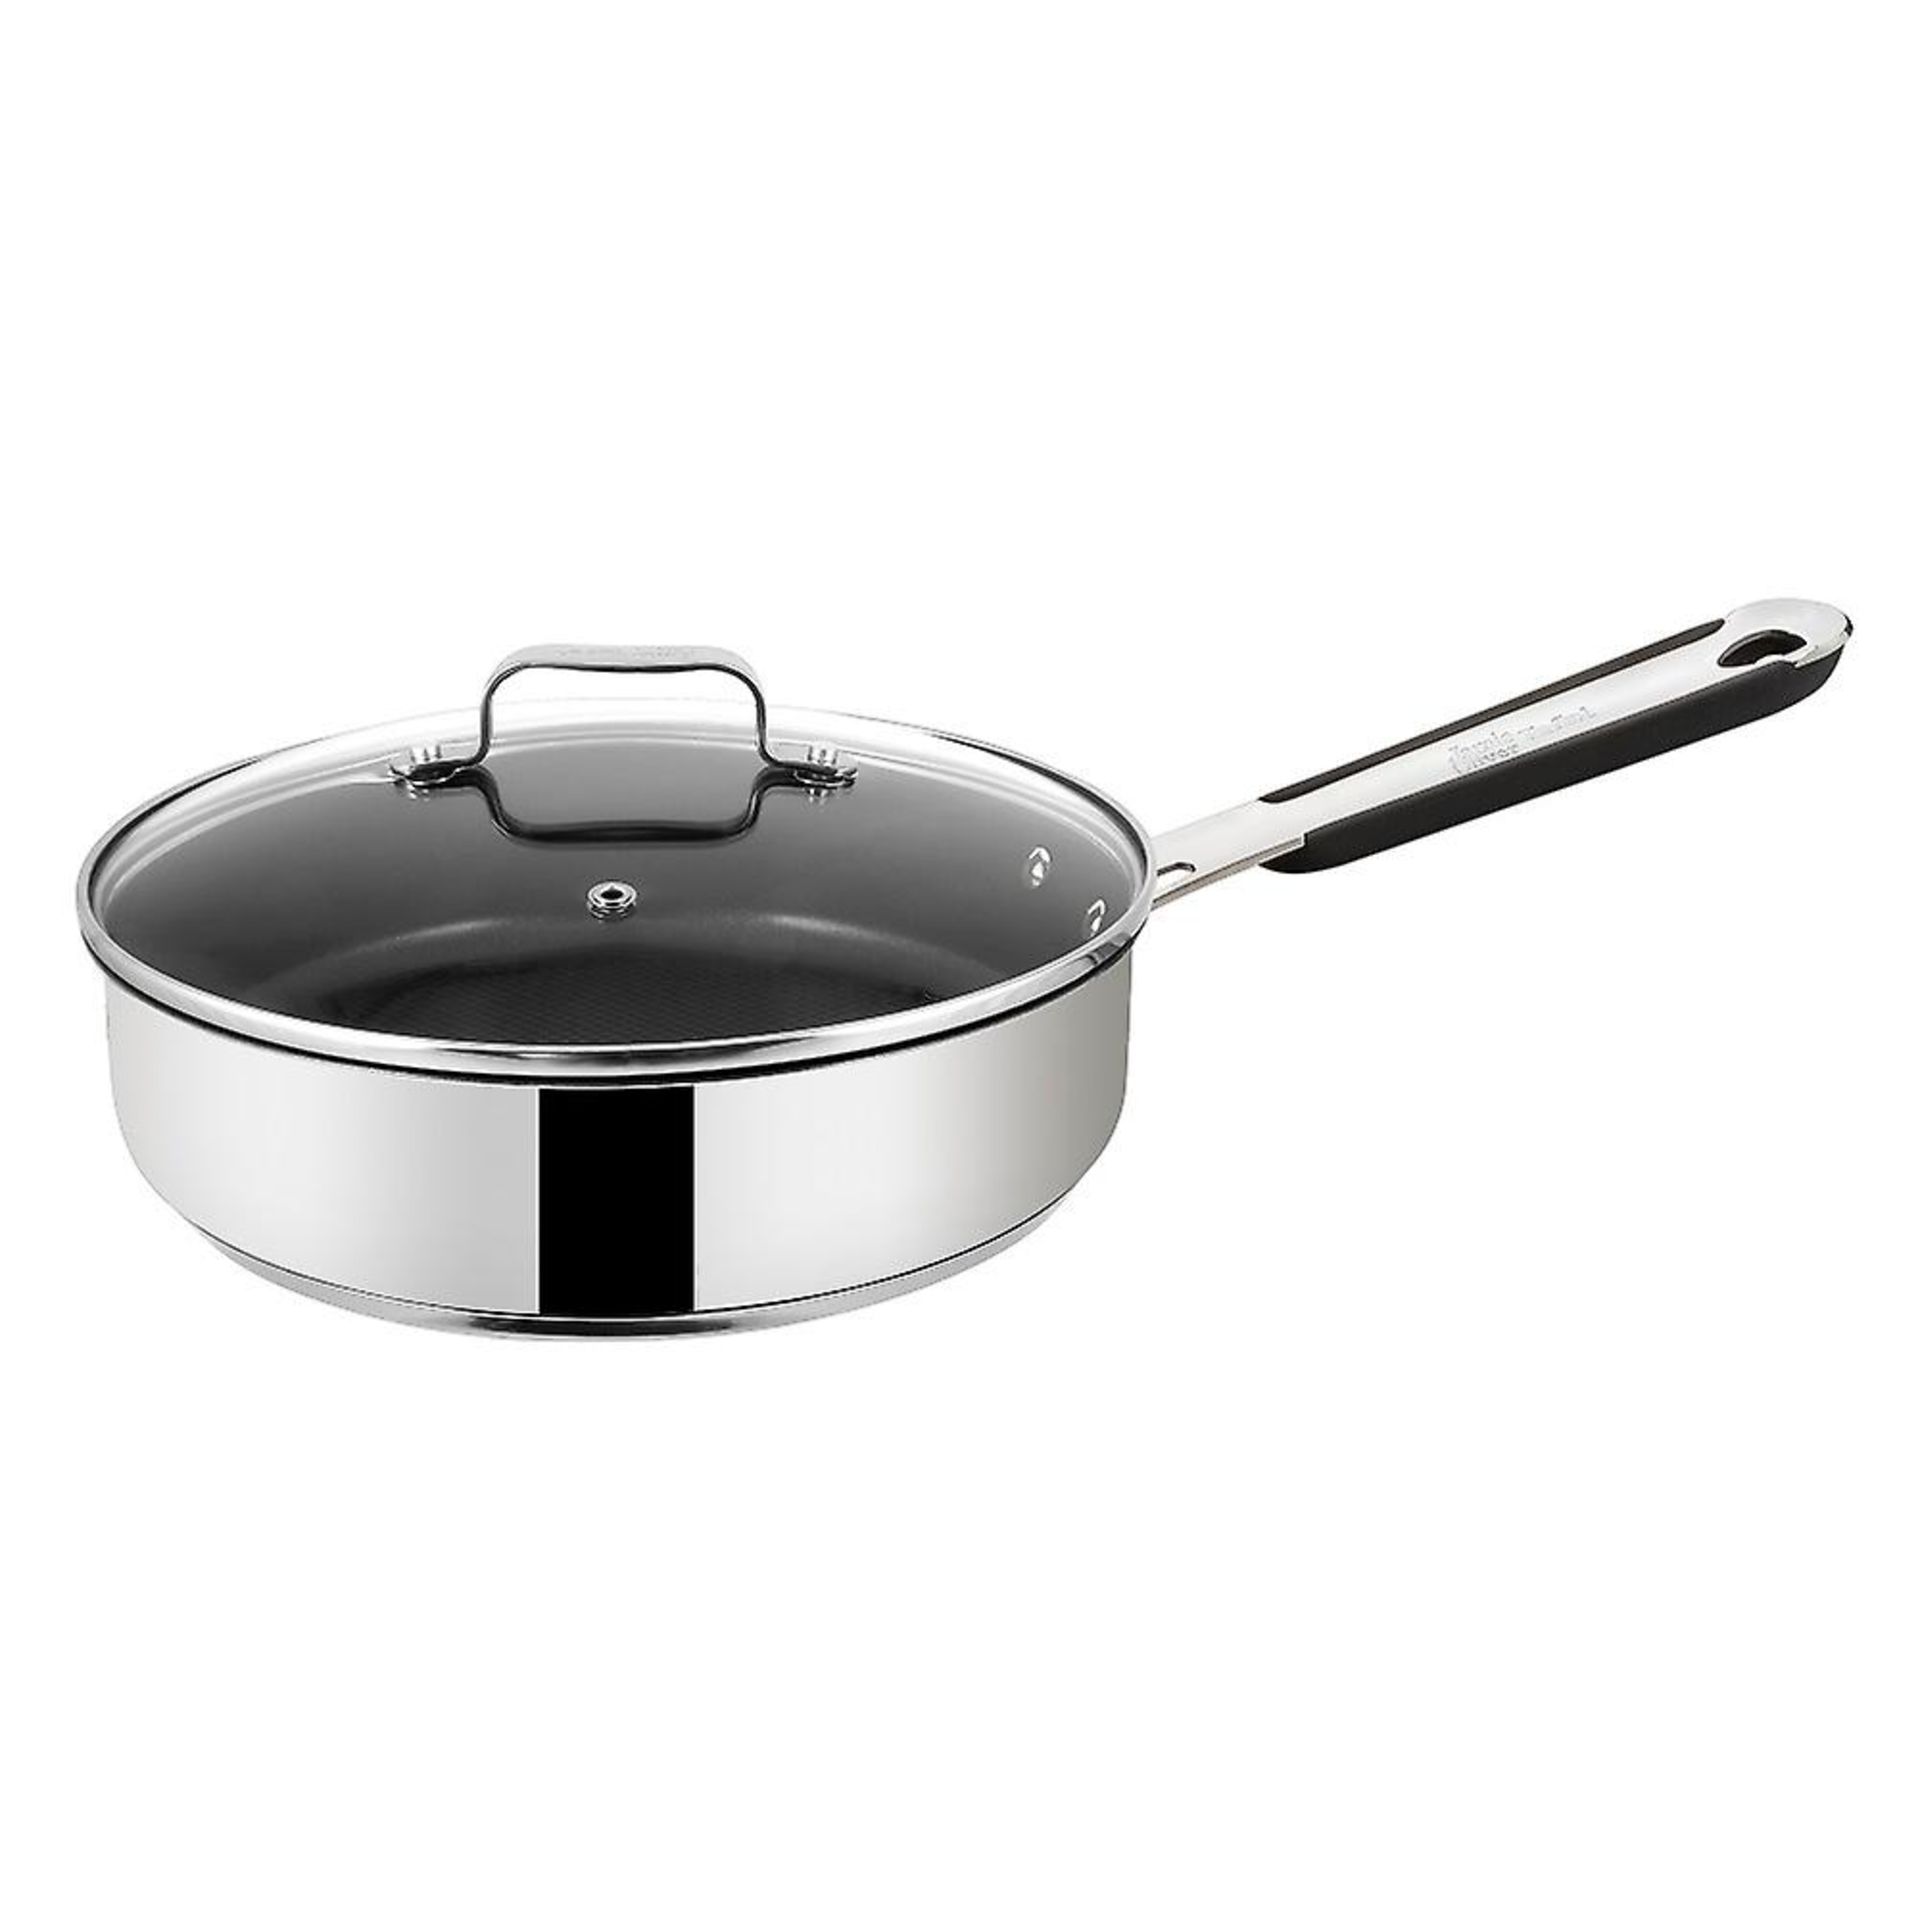 V Brand New Tefal Jamie Oliver Stainless Steel 25cm Saute Pan & Lid - 2.8L - Thermo Spot